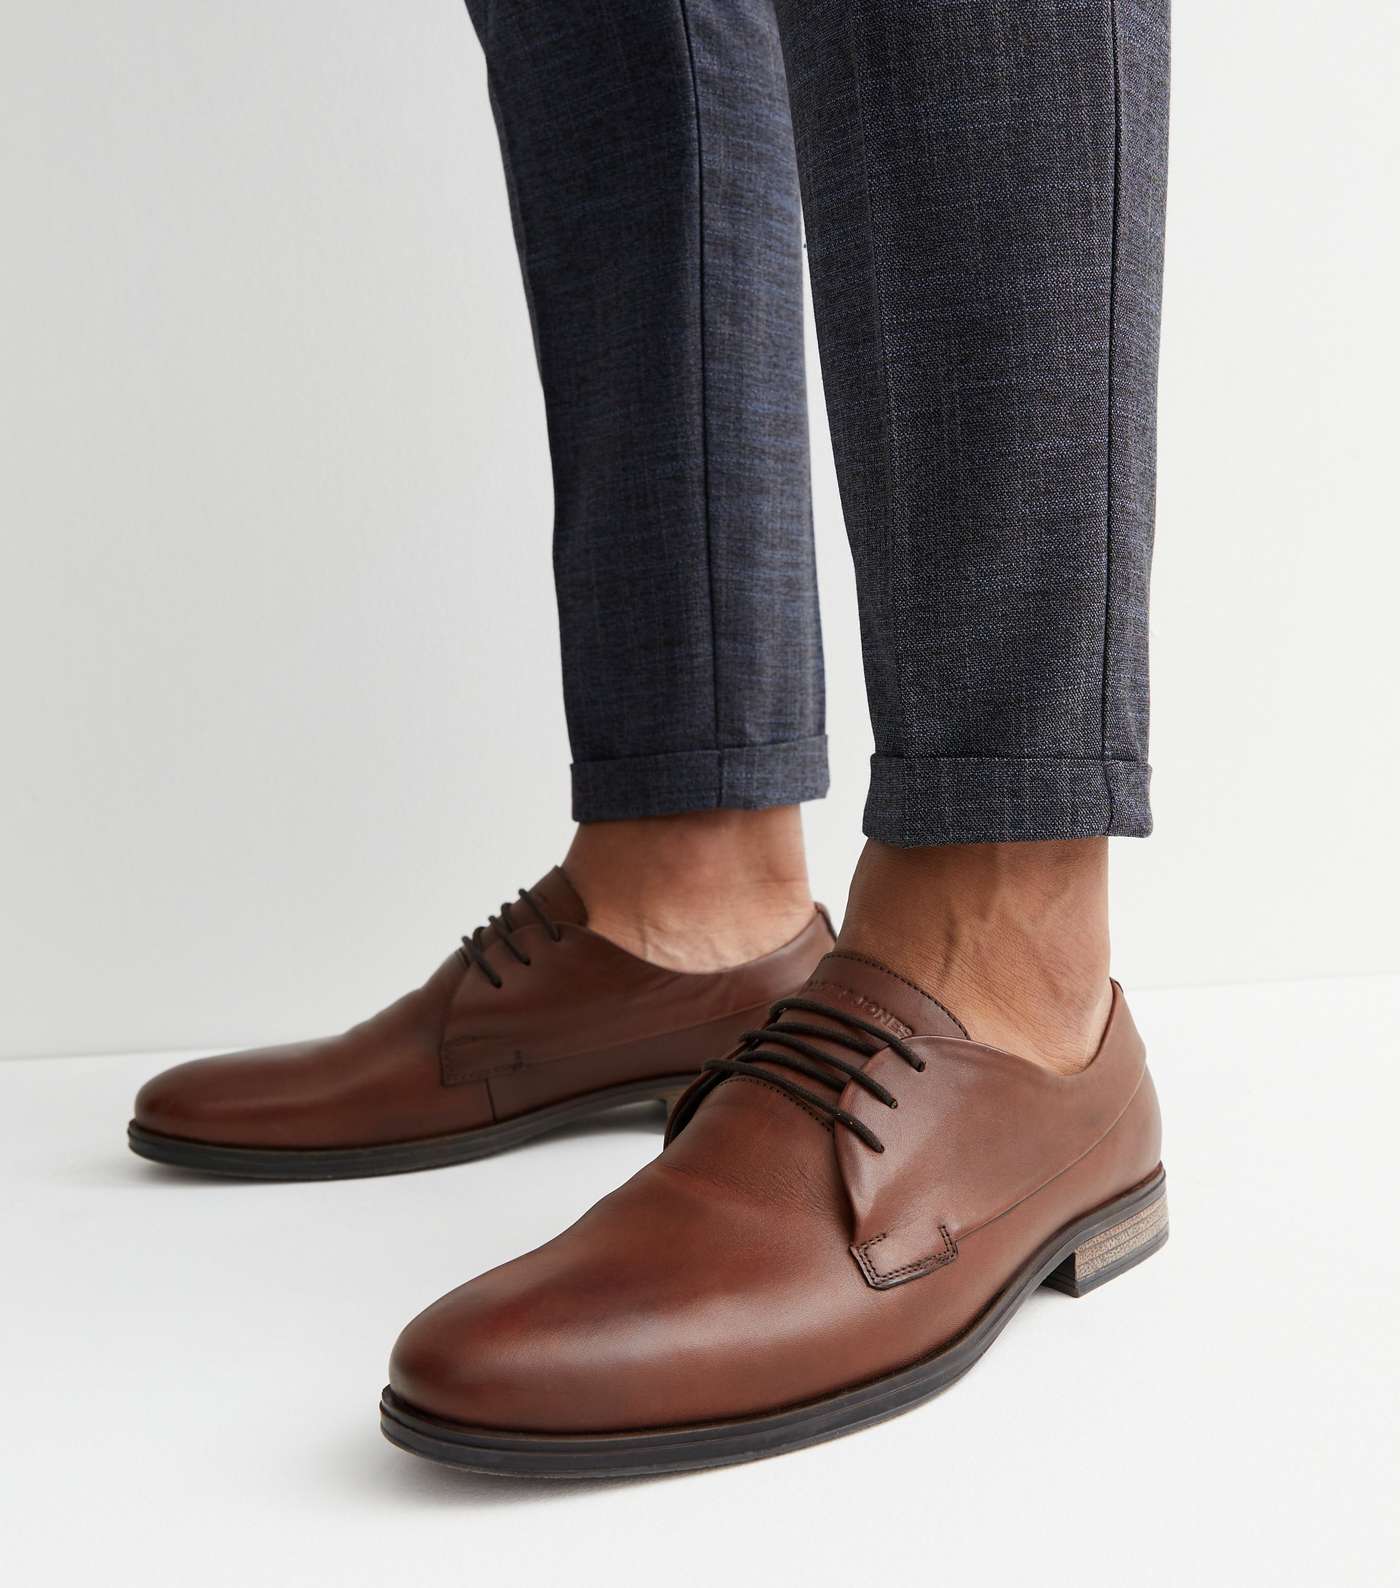 Jack & Jones Rust Leather Lace Up Rounded Brogues Image 2